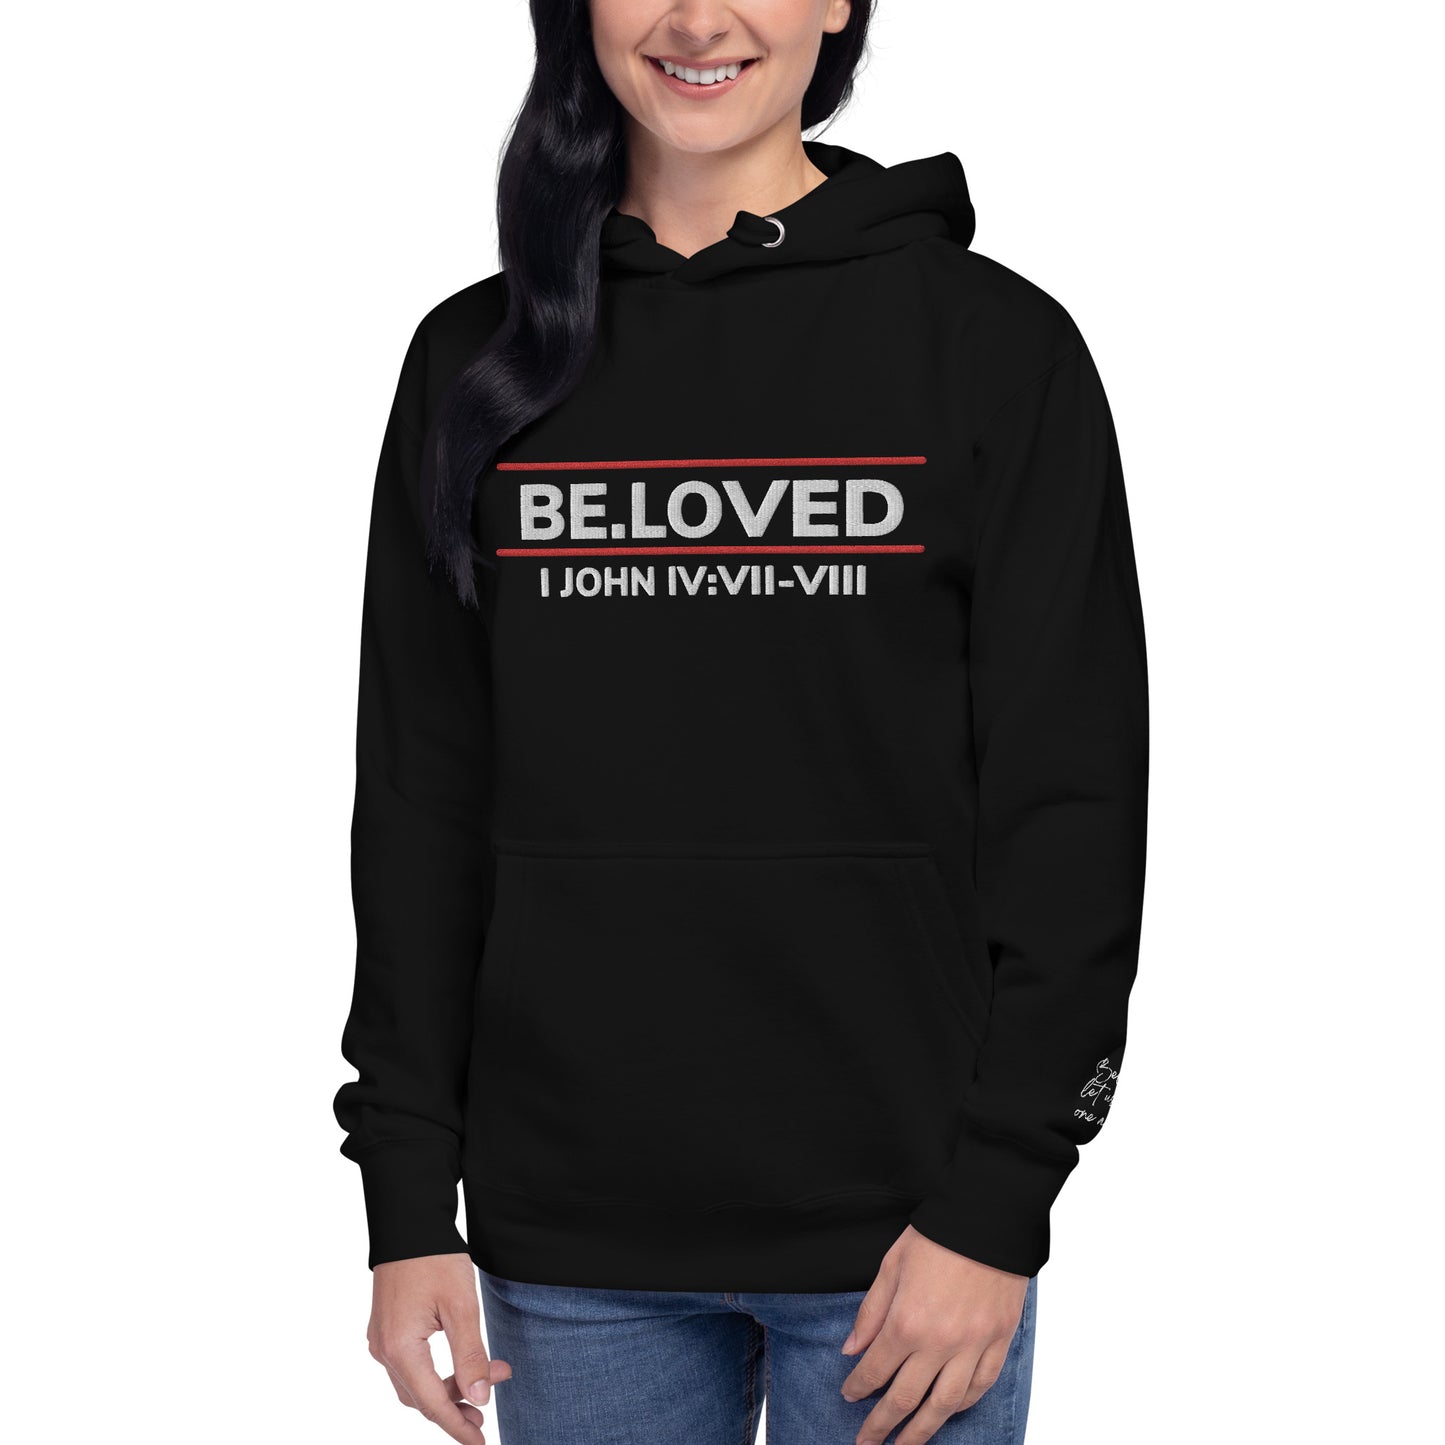 Love One Another Hoodie